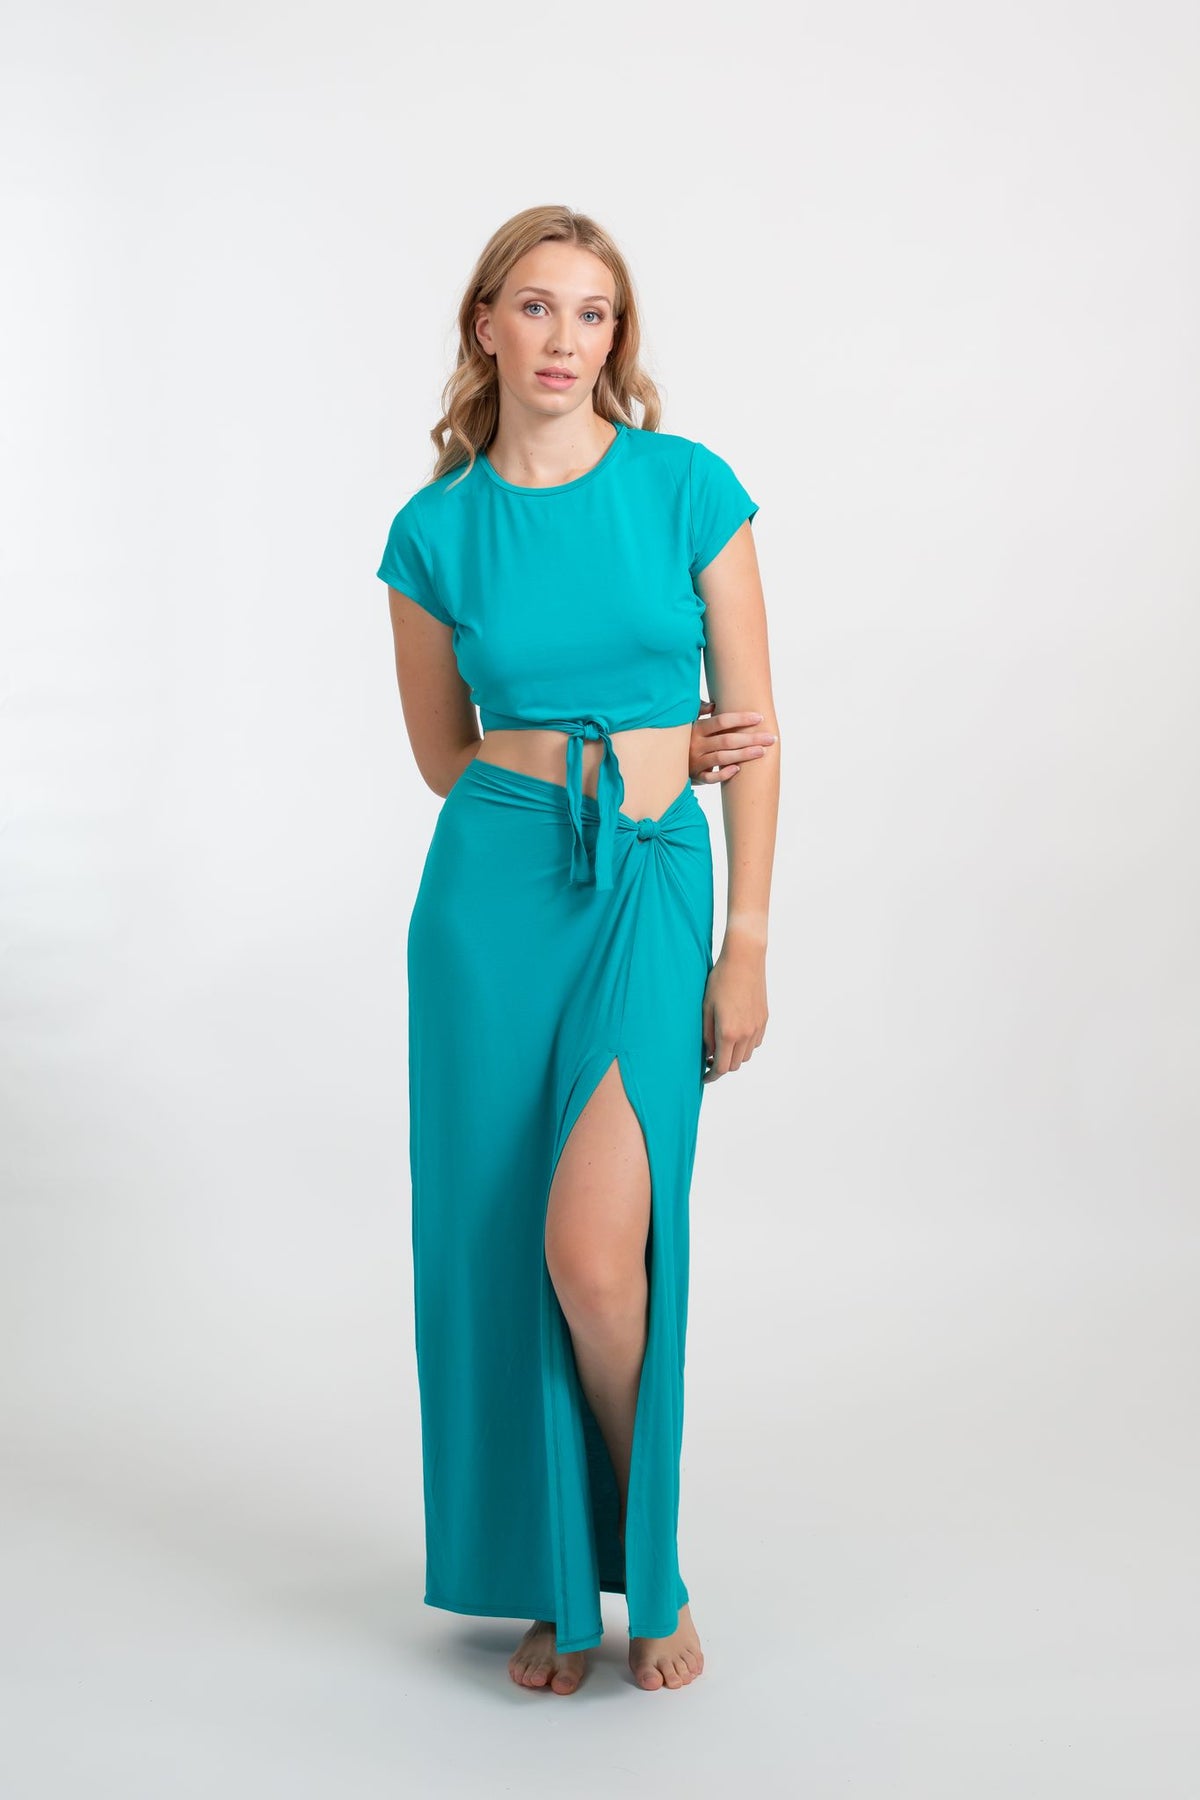 a front shot of a female model wearing matching auqamarin color crop top and maxi side slit skirt